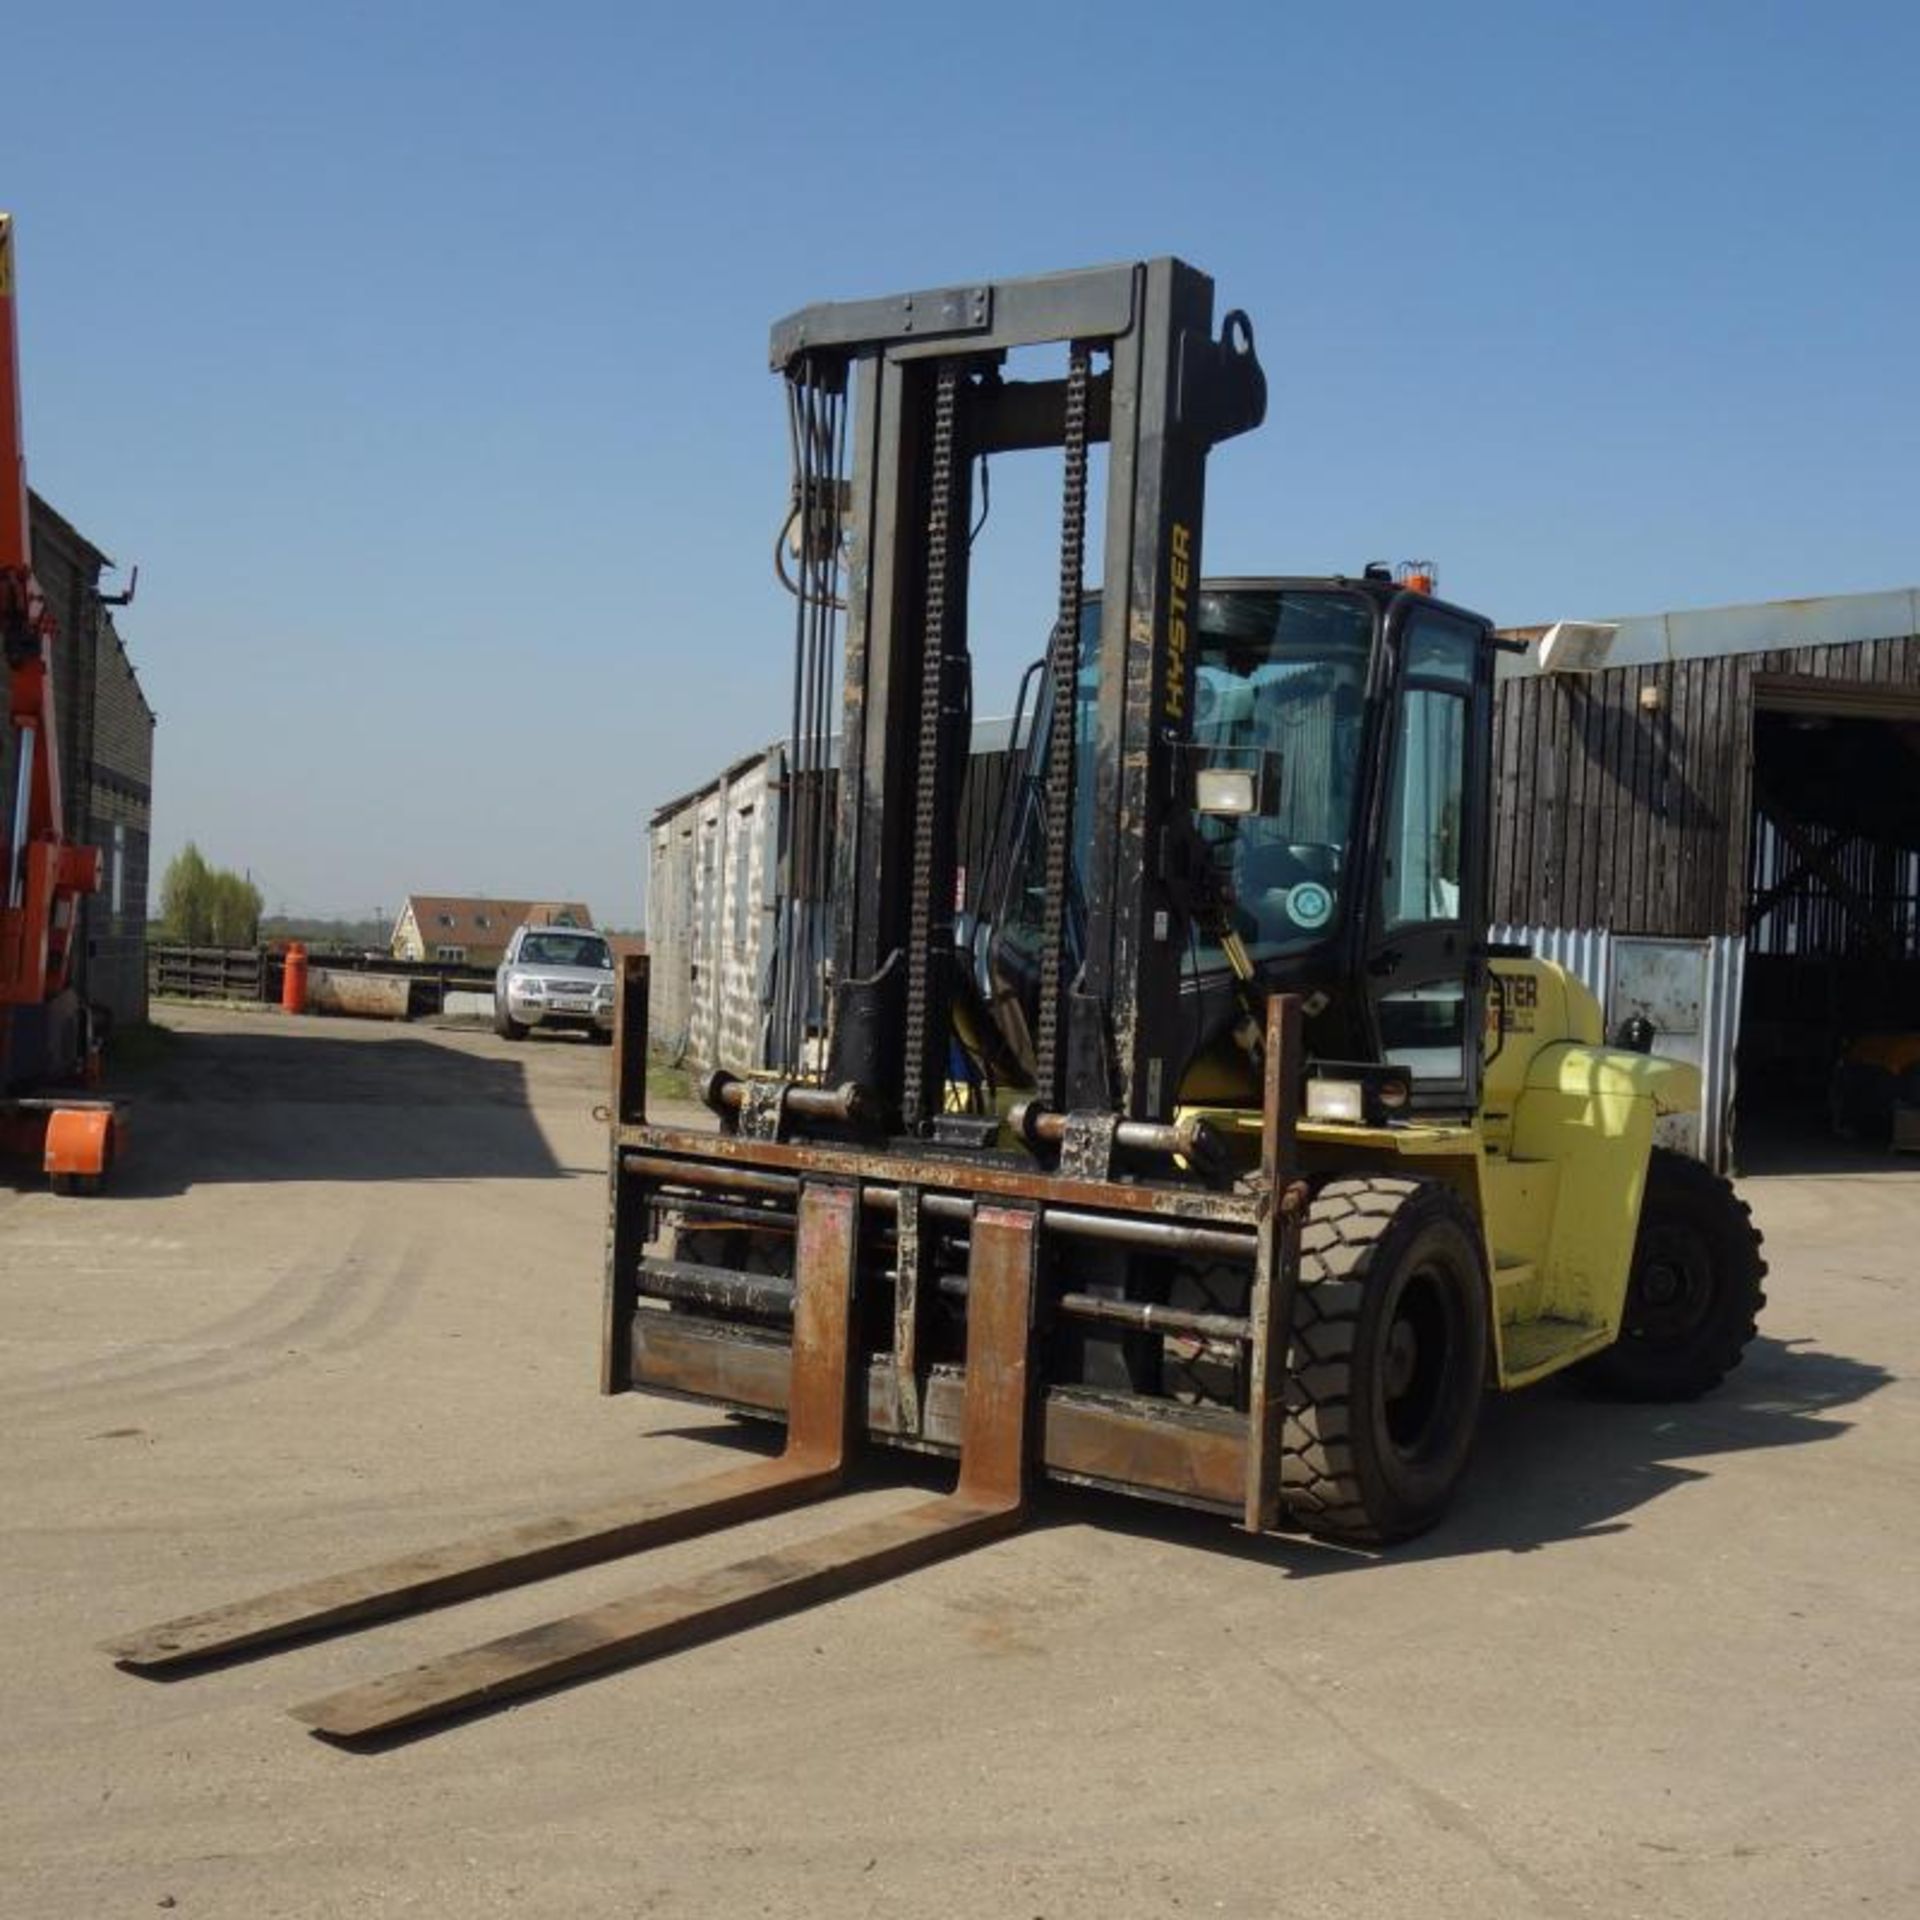 2006 Hyster M12.00xm 12 Ton Forklift, 8151 Hours From New - Image 4 of 12